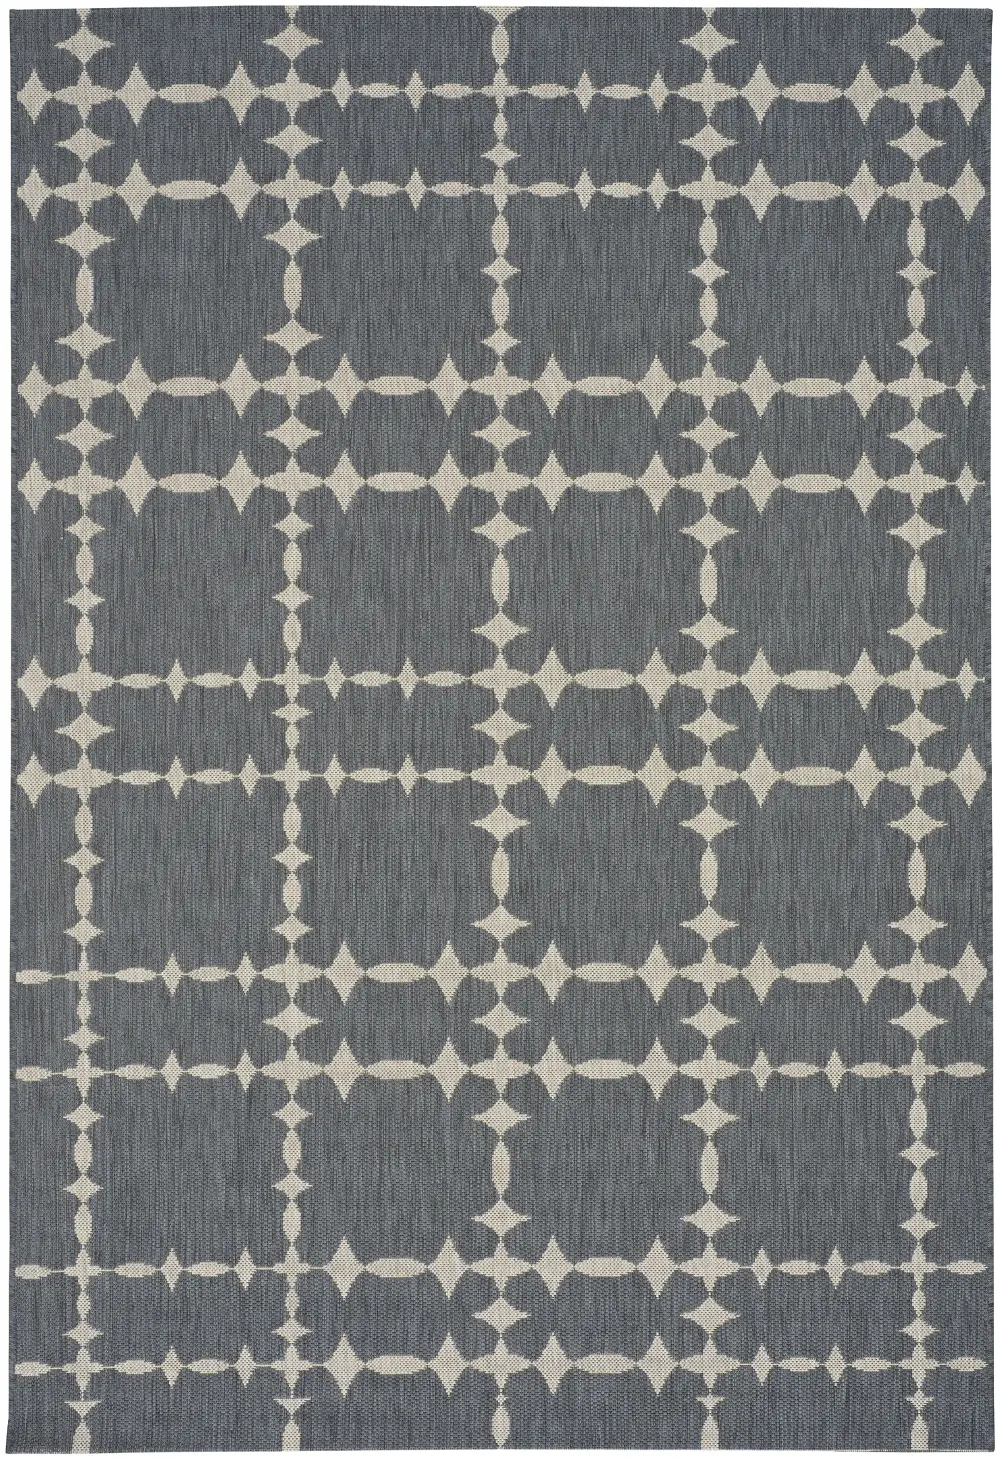 4738RS03110506300 4 x 6 Small Charcoal Gray Indoor-Outdoor Rug - Finesse-Tower Court-1